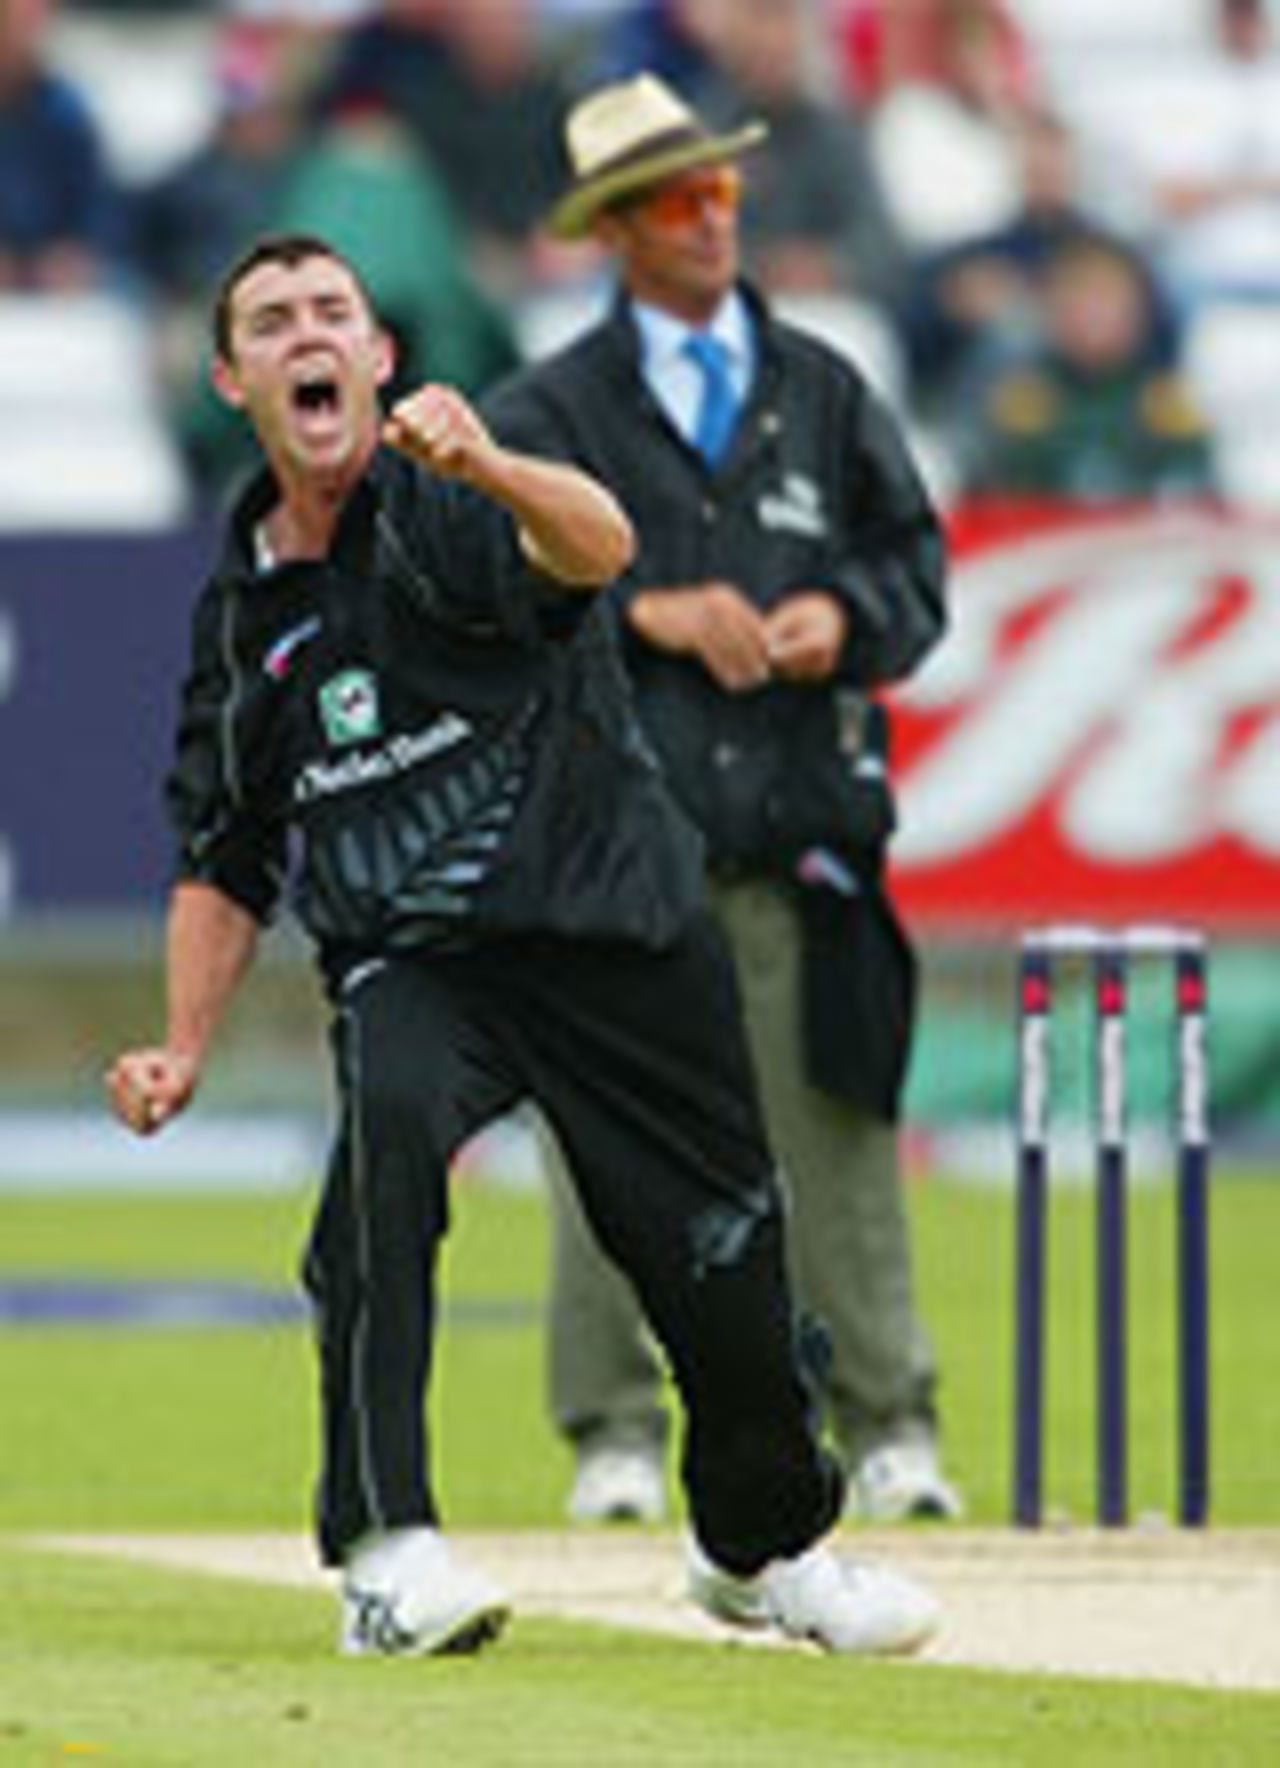 James Franklin celebrates another wicket, en route to his career-best figures of 5 for 42 at Chester-le-Street, England V New Zealand, NatWest Series, 29 June 2004